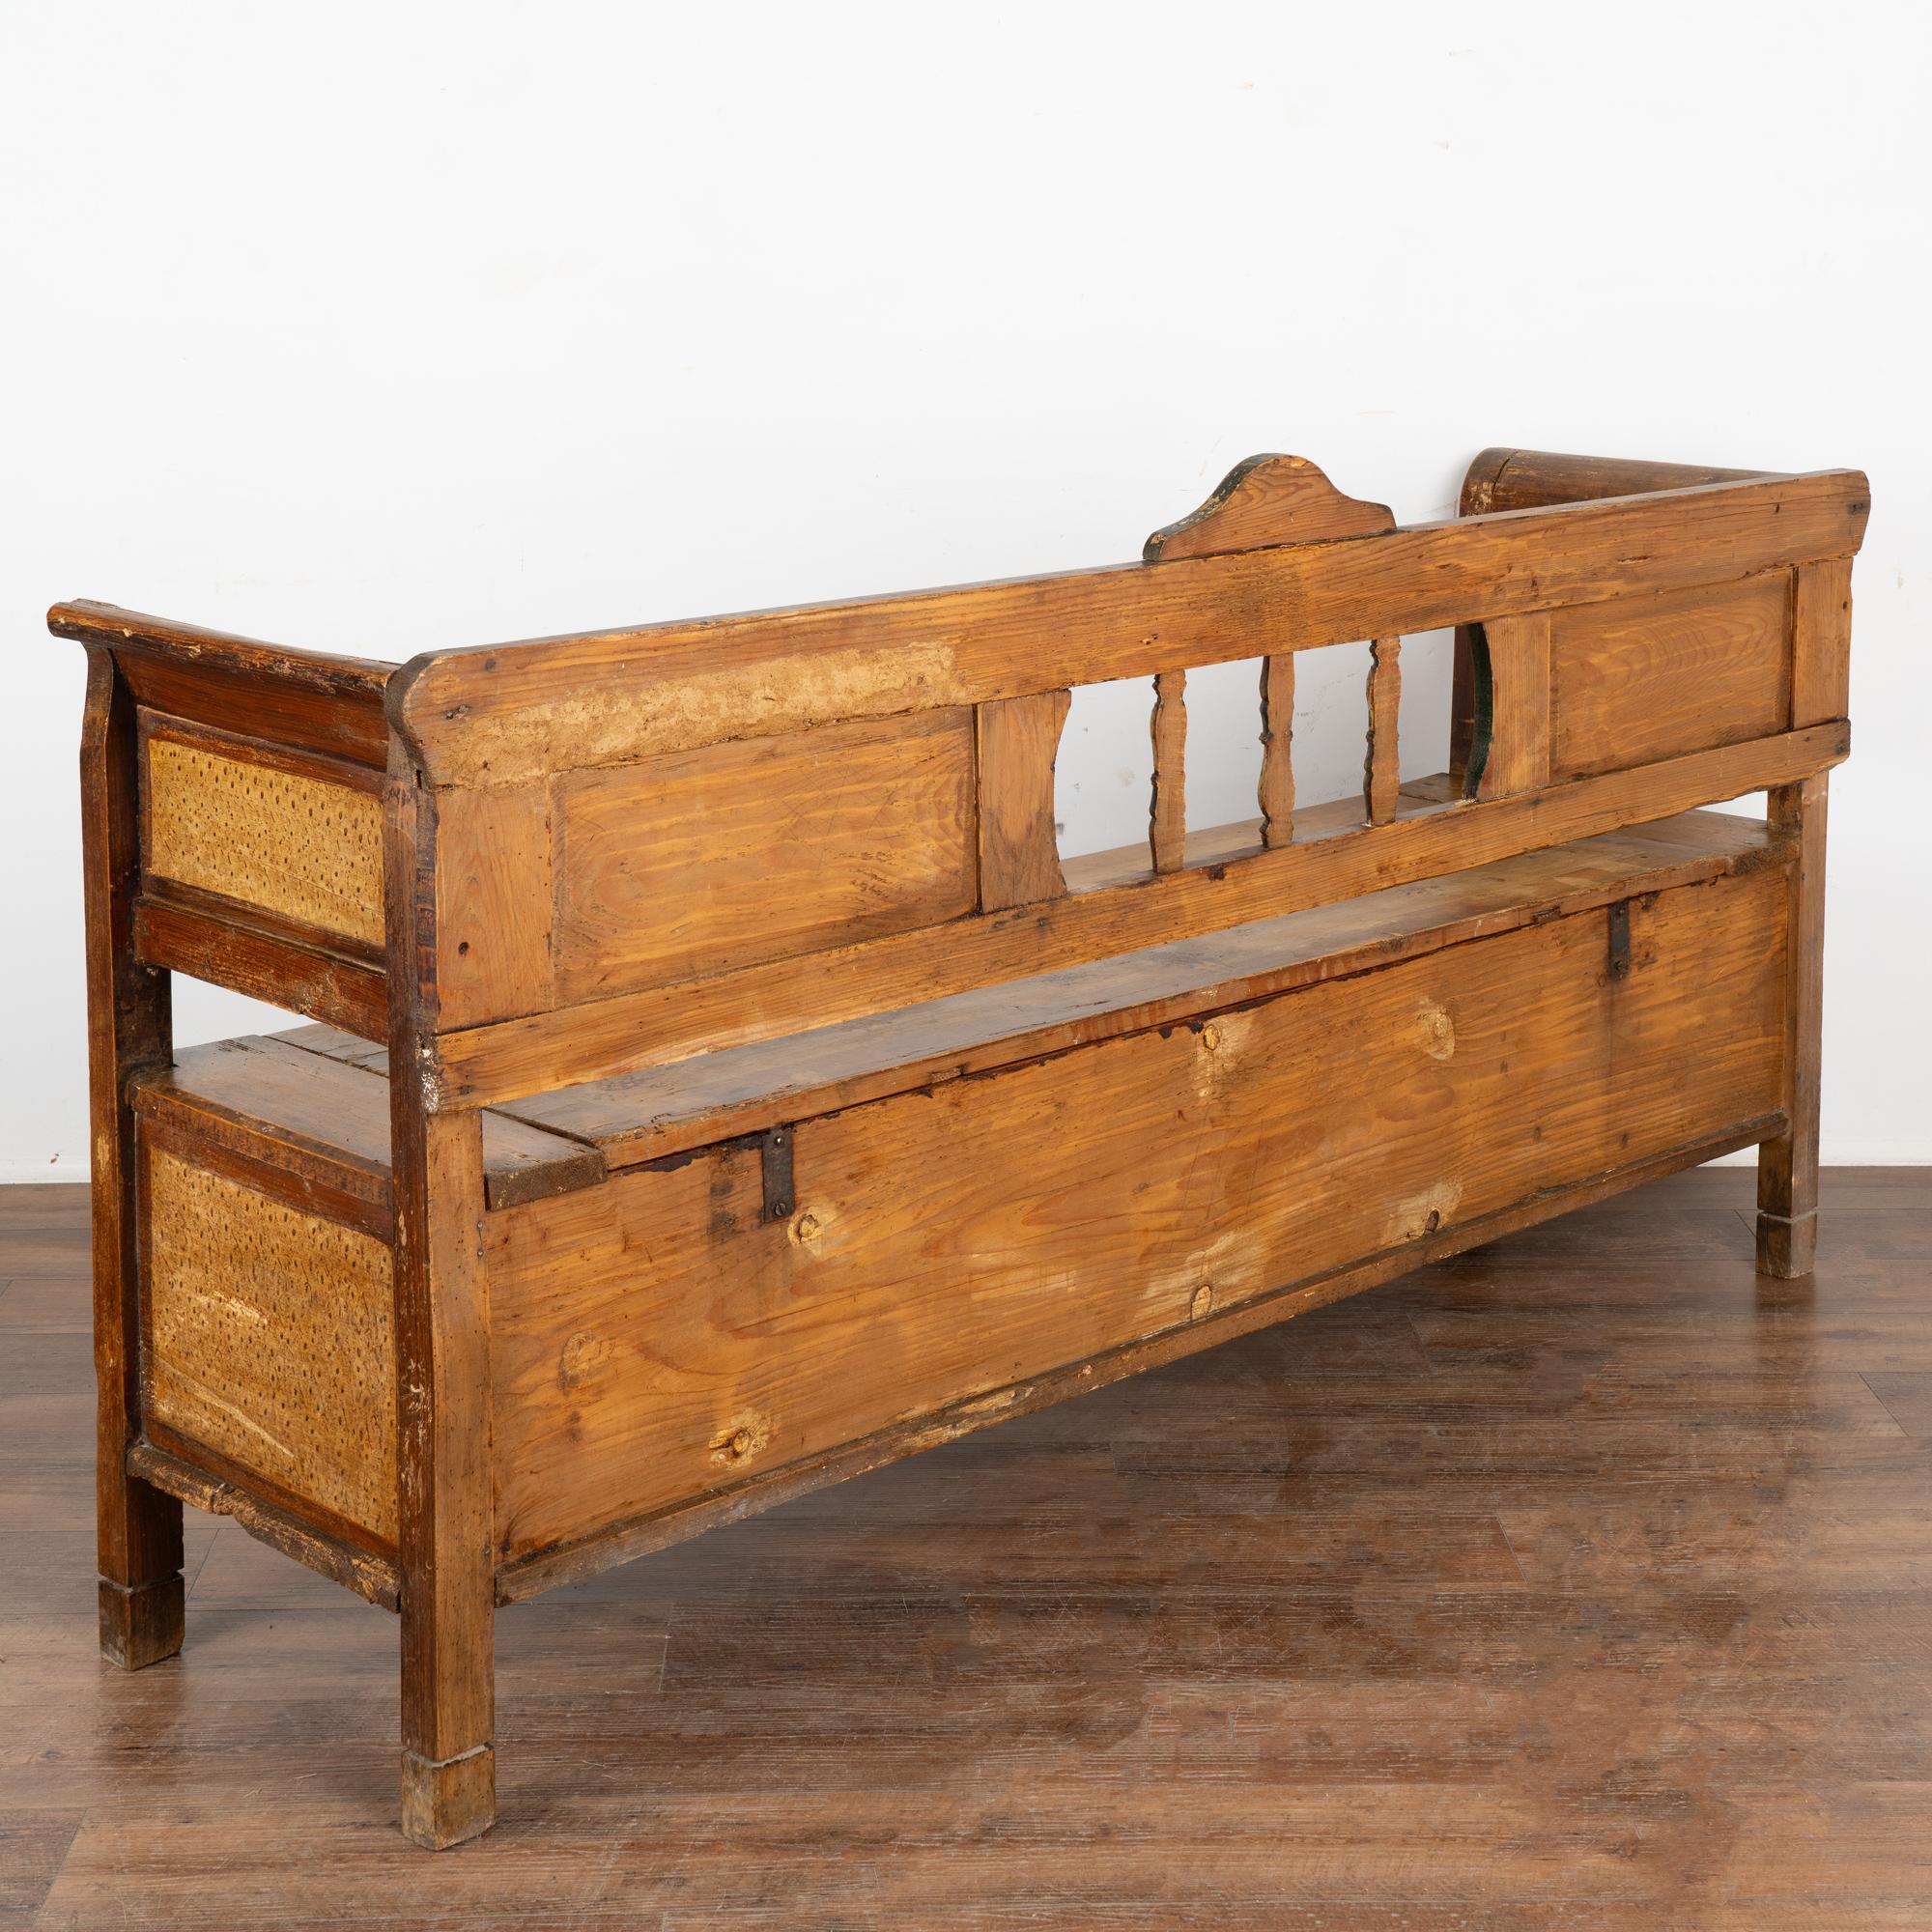 Original Painted Pine Bench With Storage, Hungary dated 1910 For Sale 7